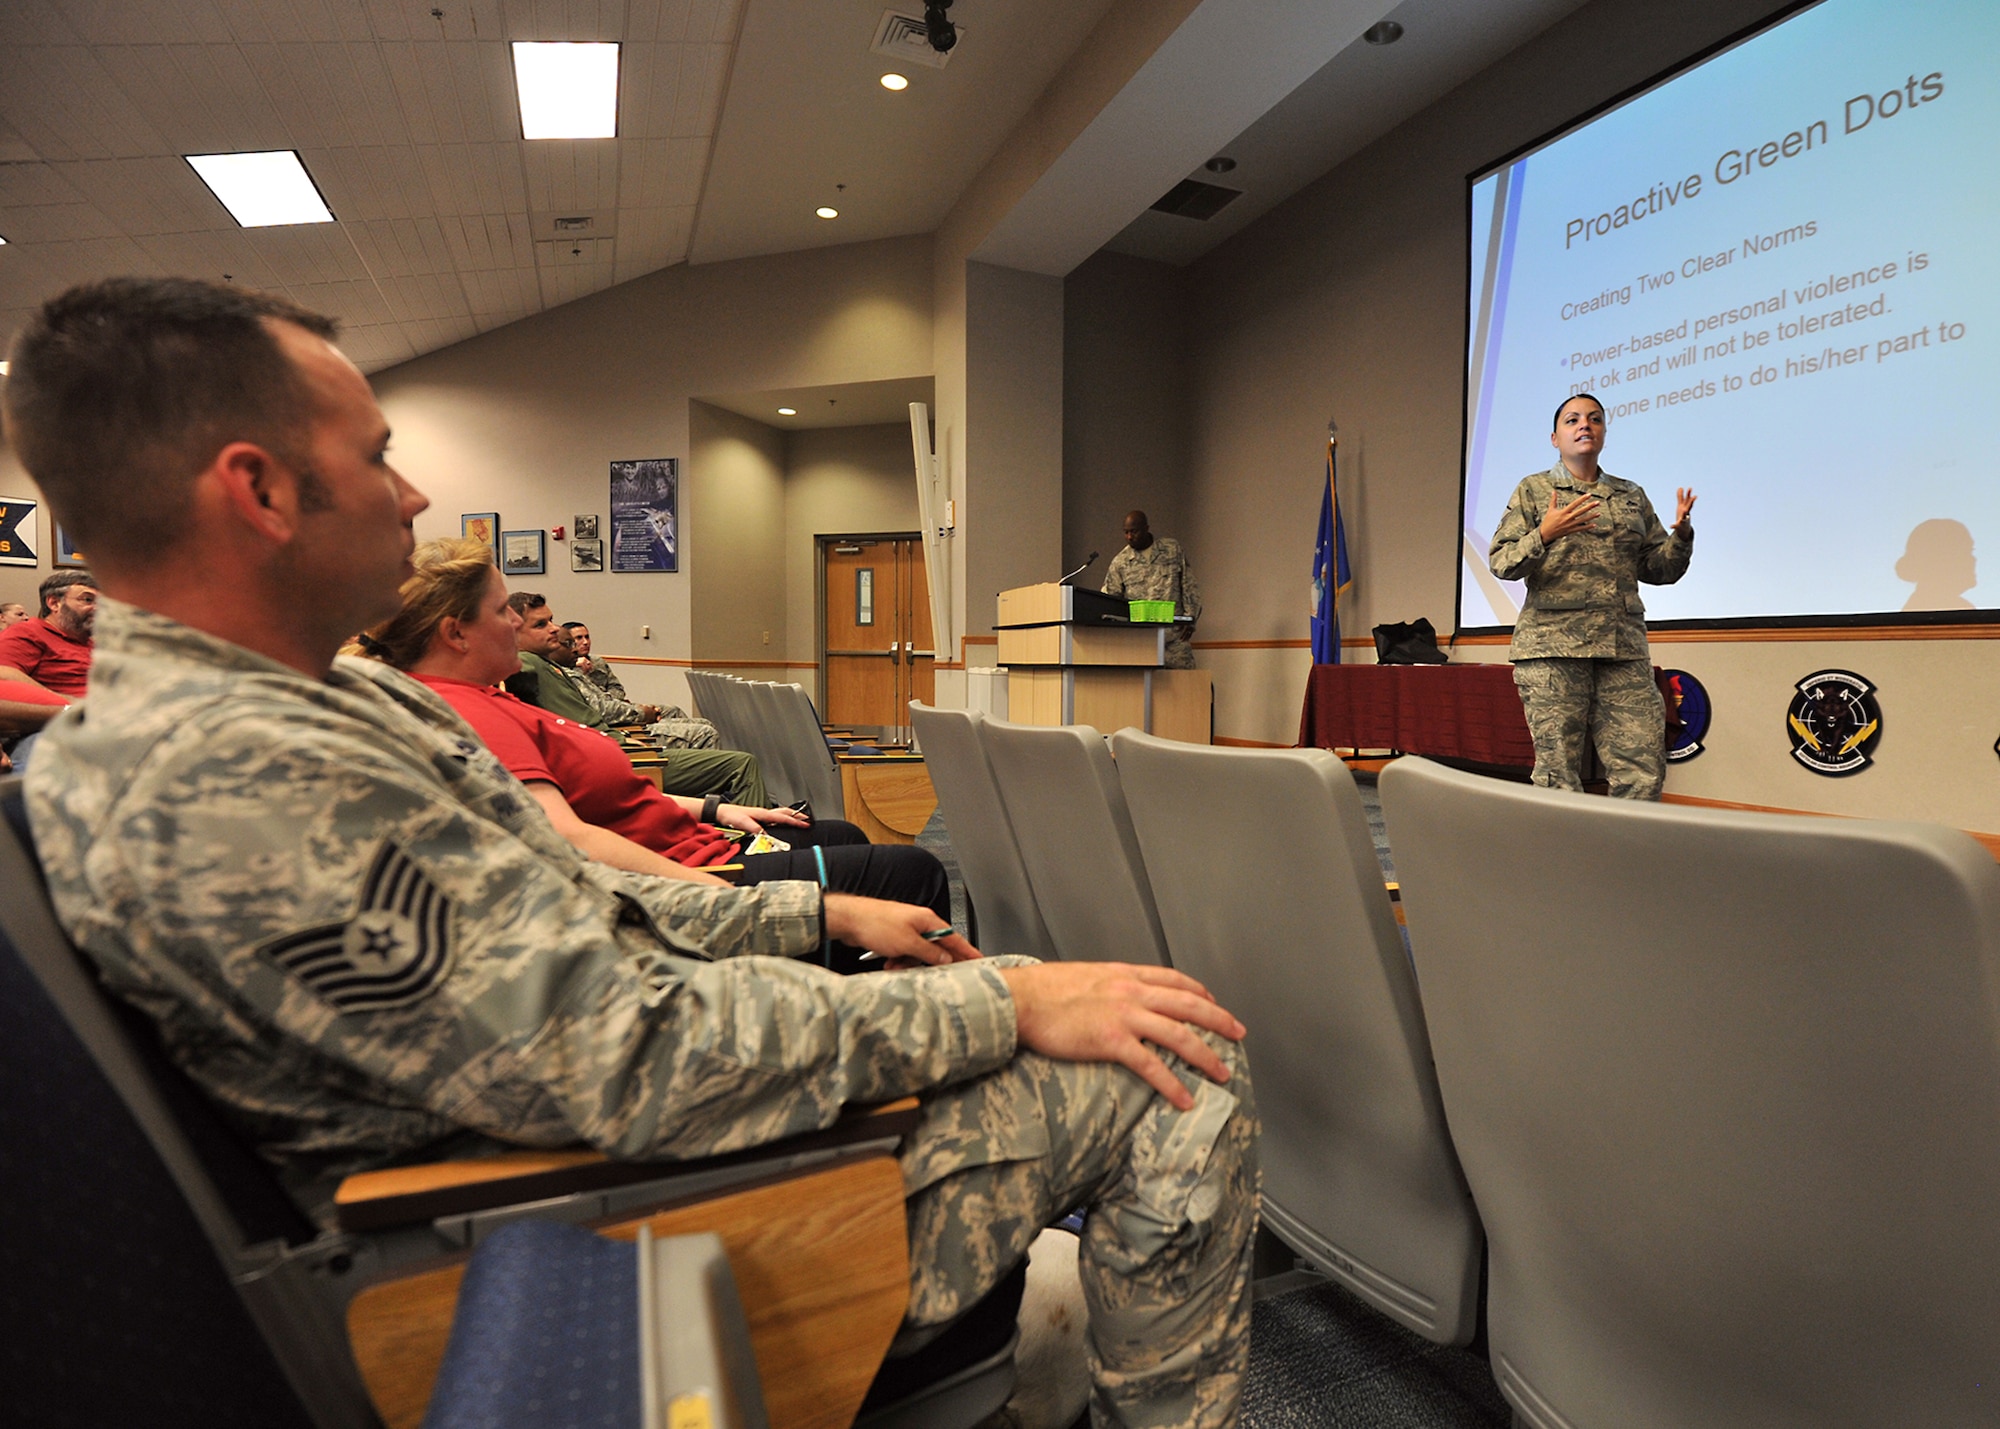 U.S. Air Force Master Sgt. Samantha Whitfield, 325th Maintenance Squadron munitions inspection NCO in charge, gives examples of the negative impact a person can have by not employing Green Dot lesson objectives at the 337th Air Control Squadron Dex Rogers auditorium on Tyndall AFB, Fla., Oct. 20, 2016. Green Dot training focuses on fortifying the existing principles of the core values and teaches students how to apply them to difficult situations such as sexual assault. (U.S. Air Force photo by Senior Airman Ty-Rico Lea/Released)